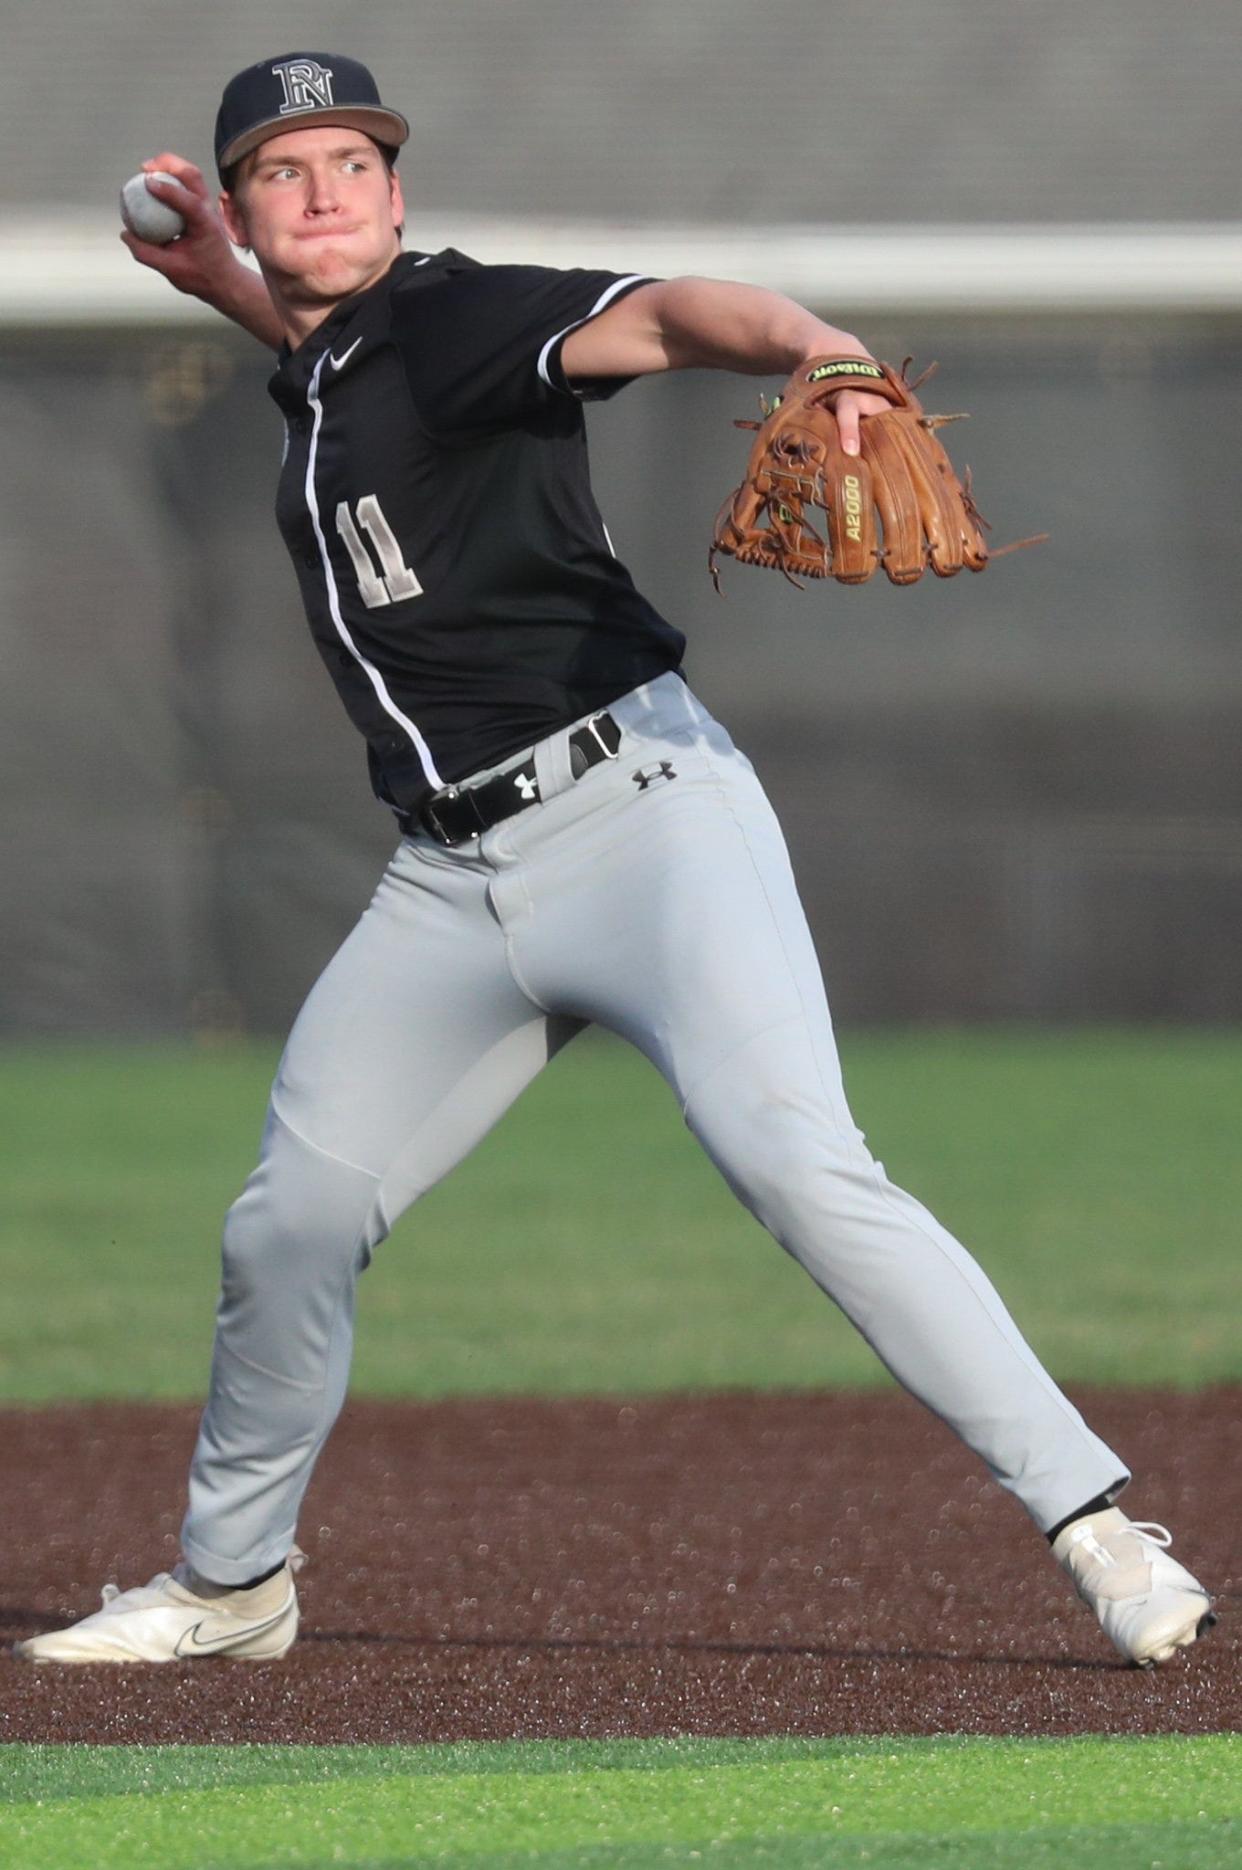 Senior infielder and pitcher Kyle Koehler delivered a standout season, leading North in batting average (.493), hits (36), RBI (27), doubles (8) and home runs (8). His home-run total set the single-season program record.